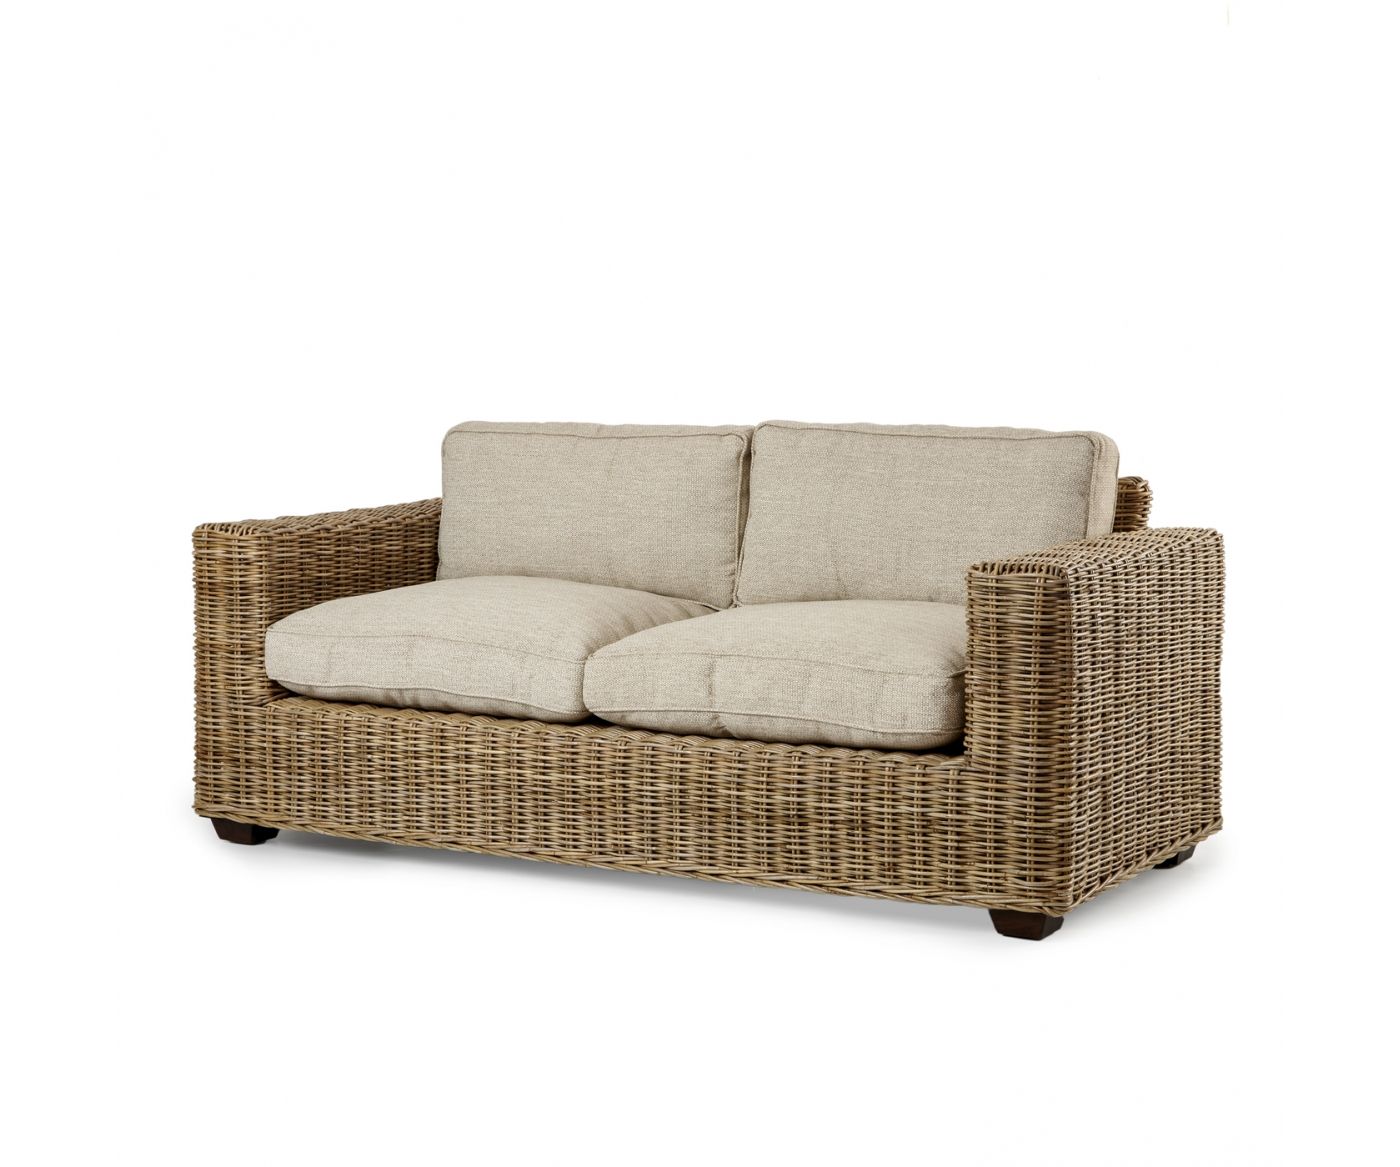 Sofa 2 Seater Kent From Natural Rattan – Candlelight Intended For Natural Woven Banana Console Tables (View 4 of 20)